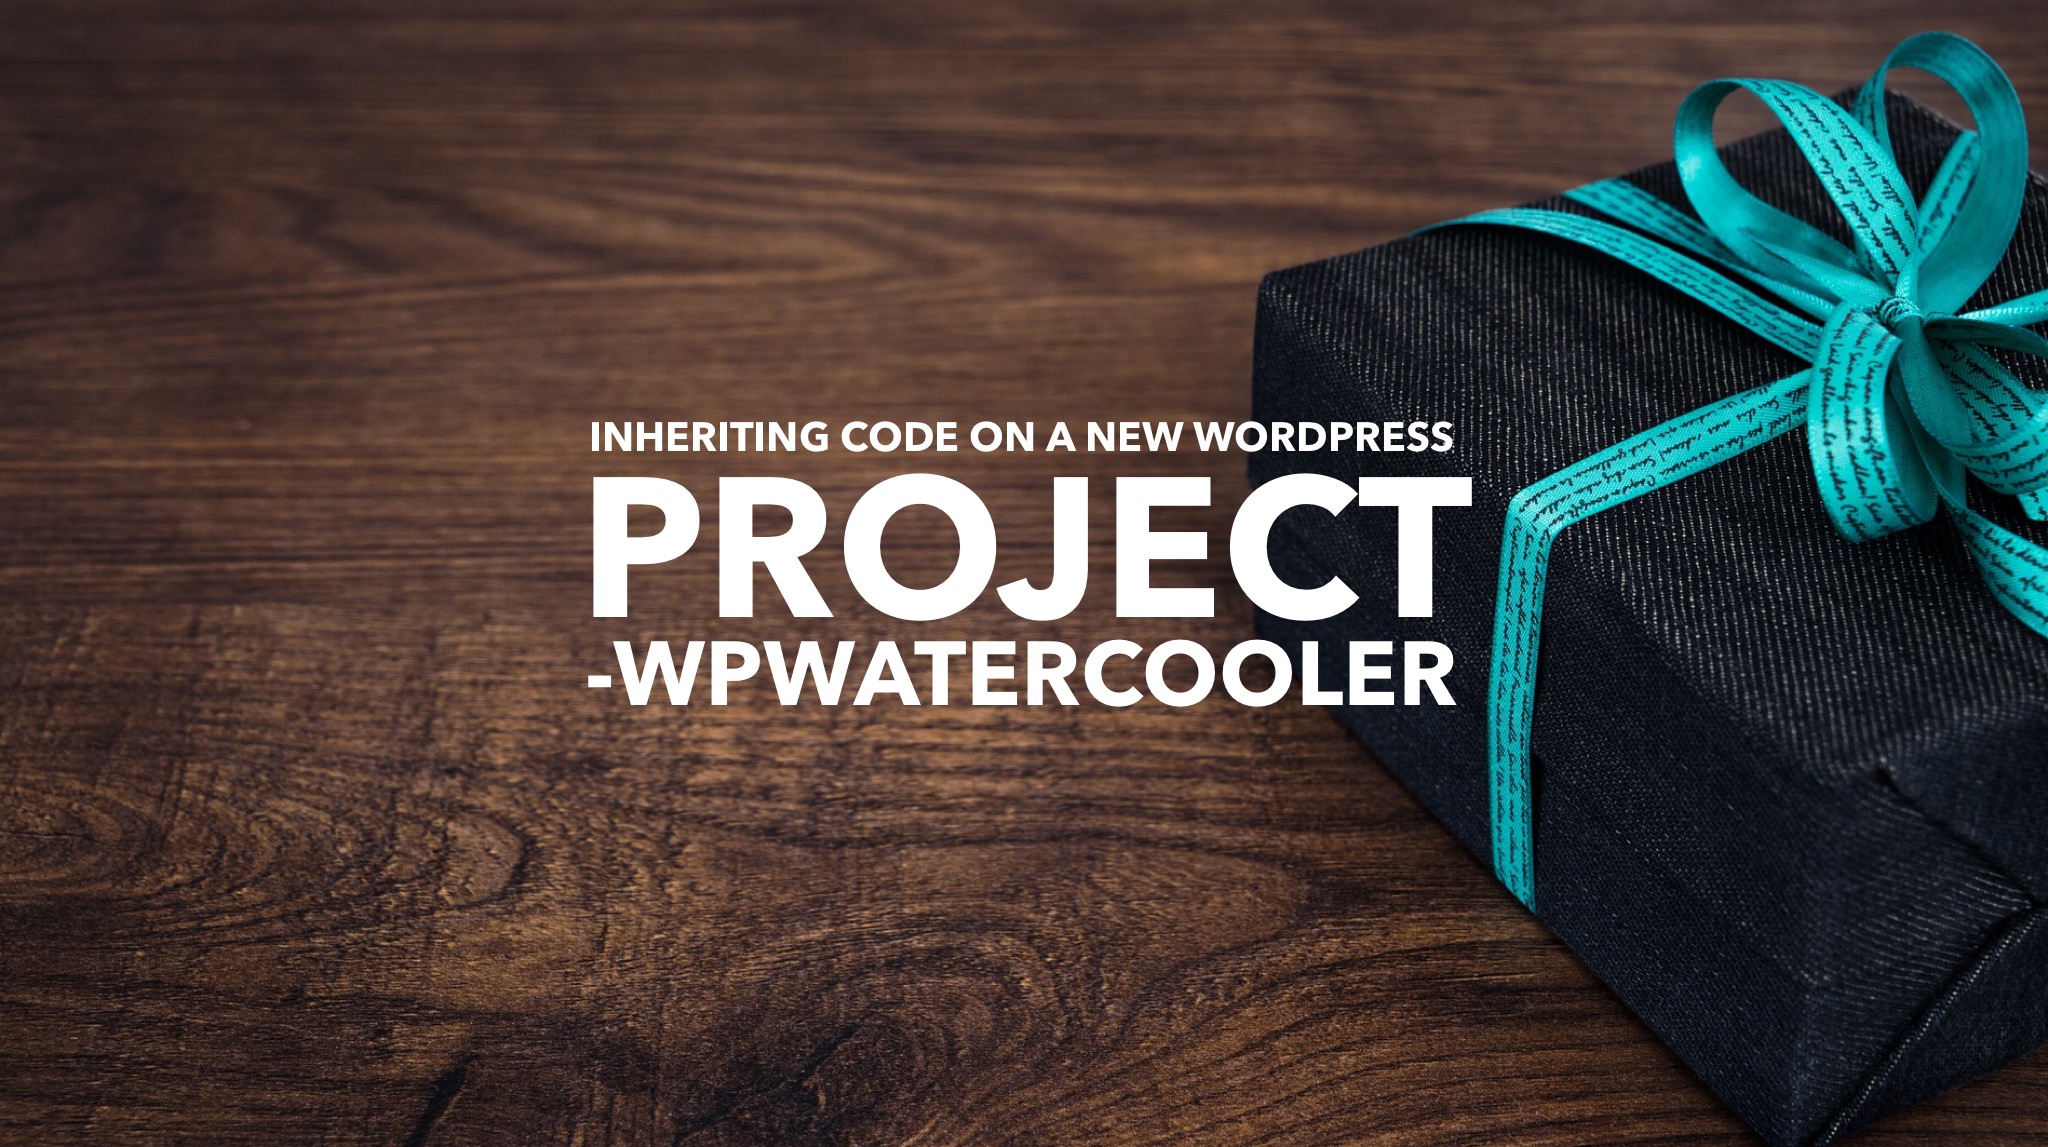 EP313 - Inheriting code on a new WordPress project